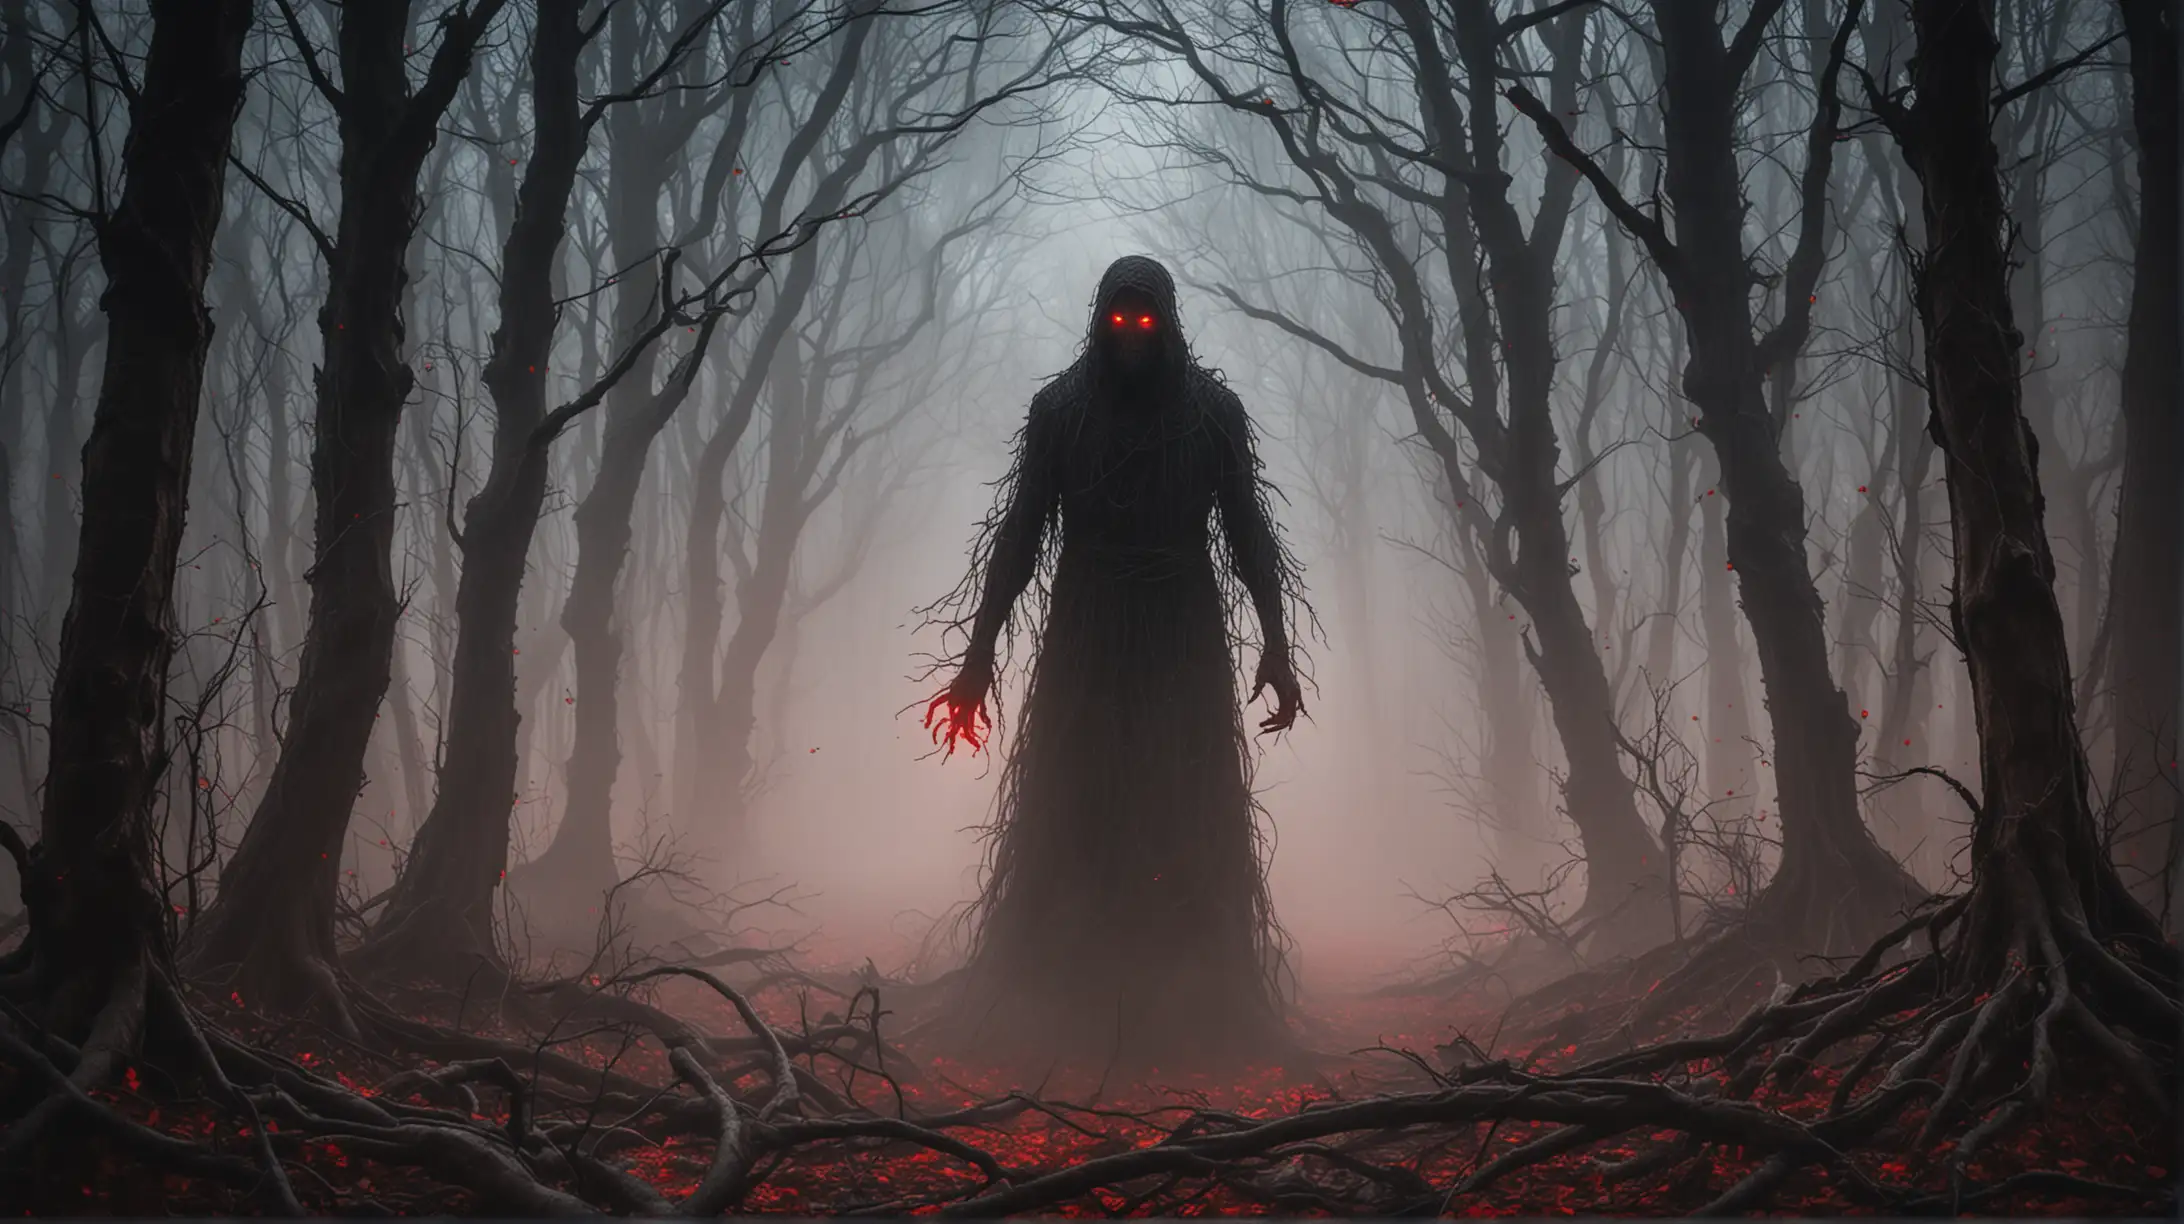 A terrifying, shadowy figure with glowing red eyes emerging from the darkness, surrounded by eerie mist and twisted trees